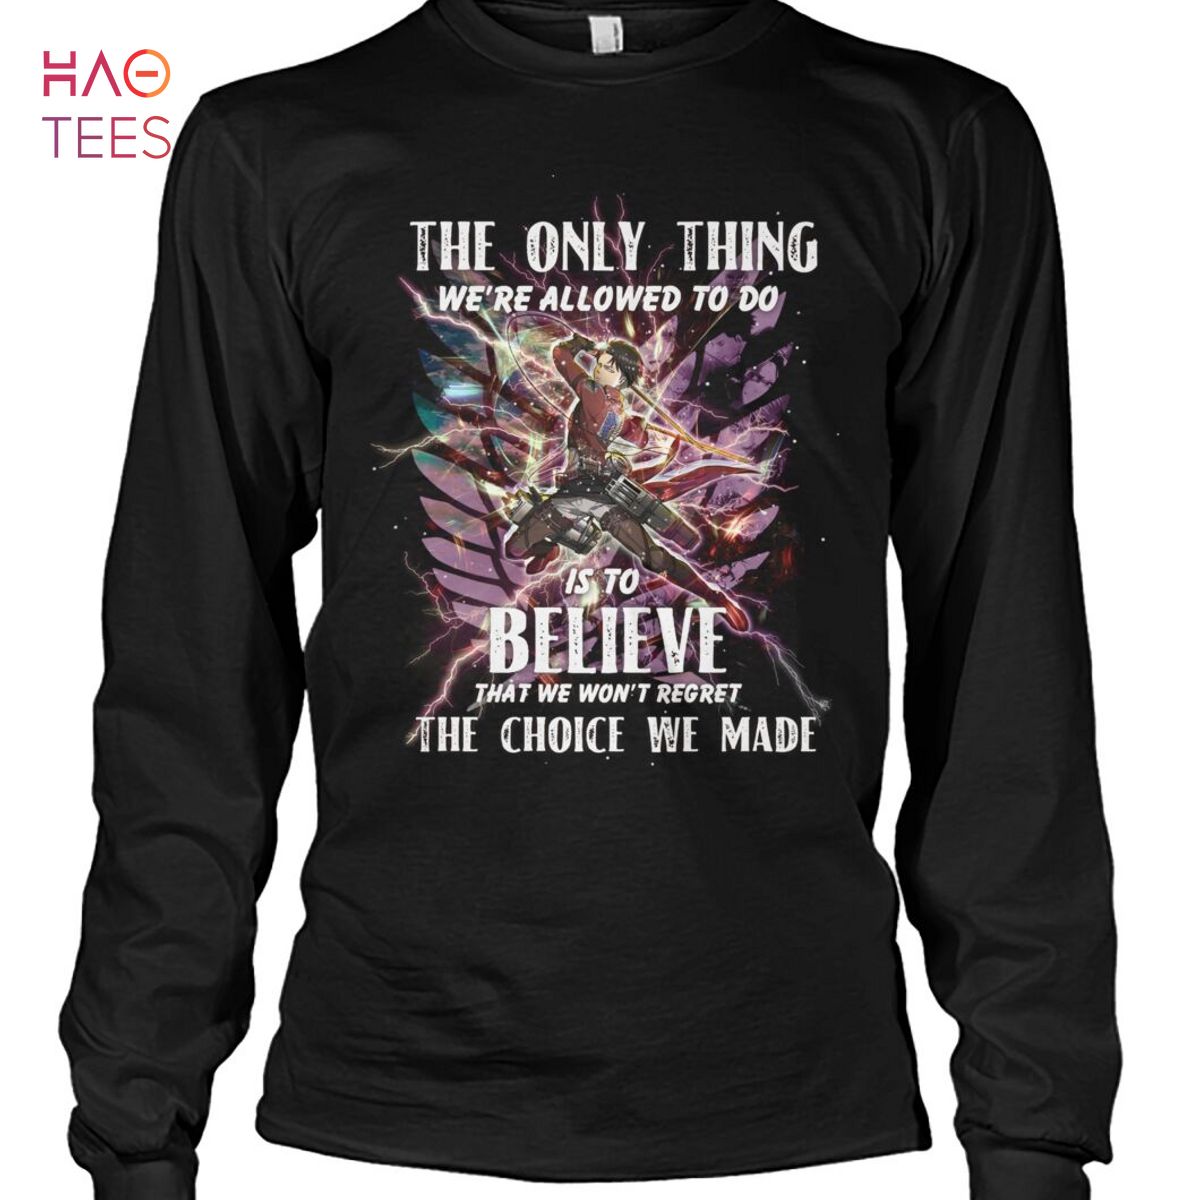 The Only Thing We re Allowed To Do Is To Believe The Choice We Made T Shirt